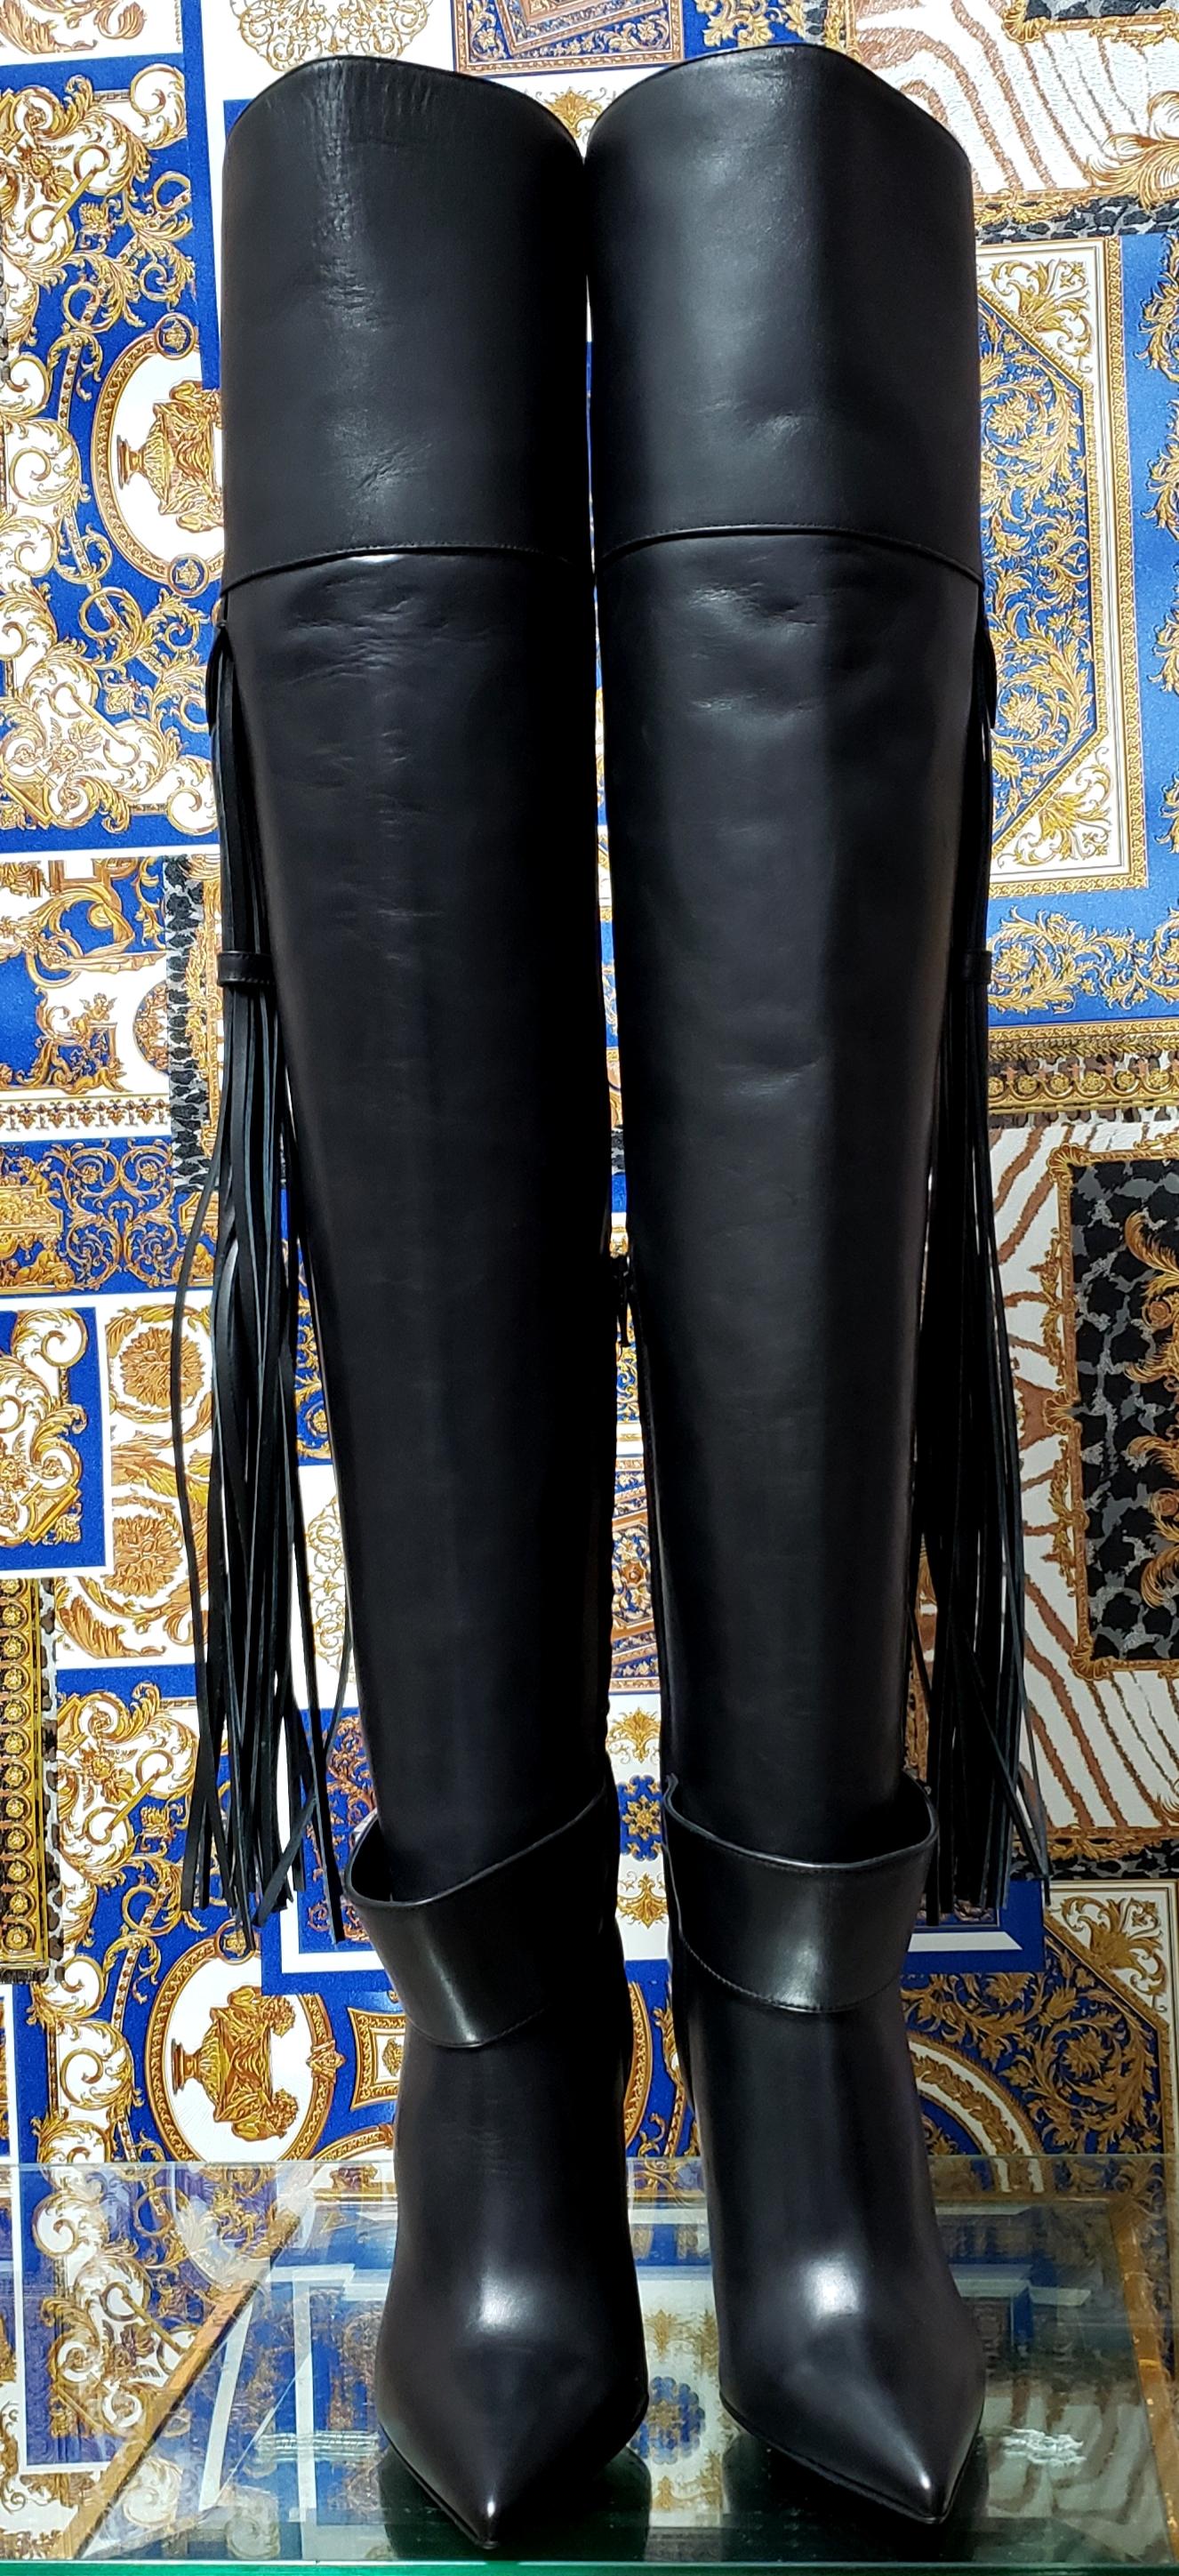 Women's Pre-Fall/14 L#9 VERSACE BLACK LEATHER OVET-the-KNEE Boots with TASSELS 35, 36, 39